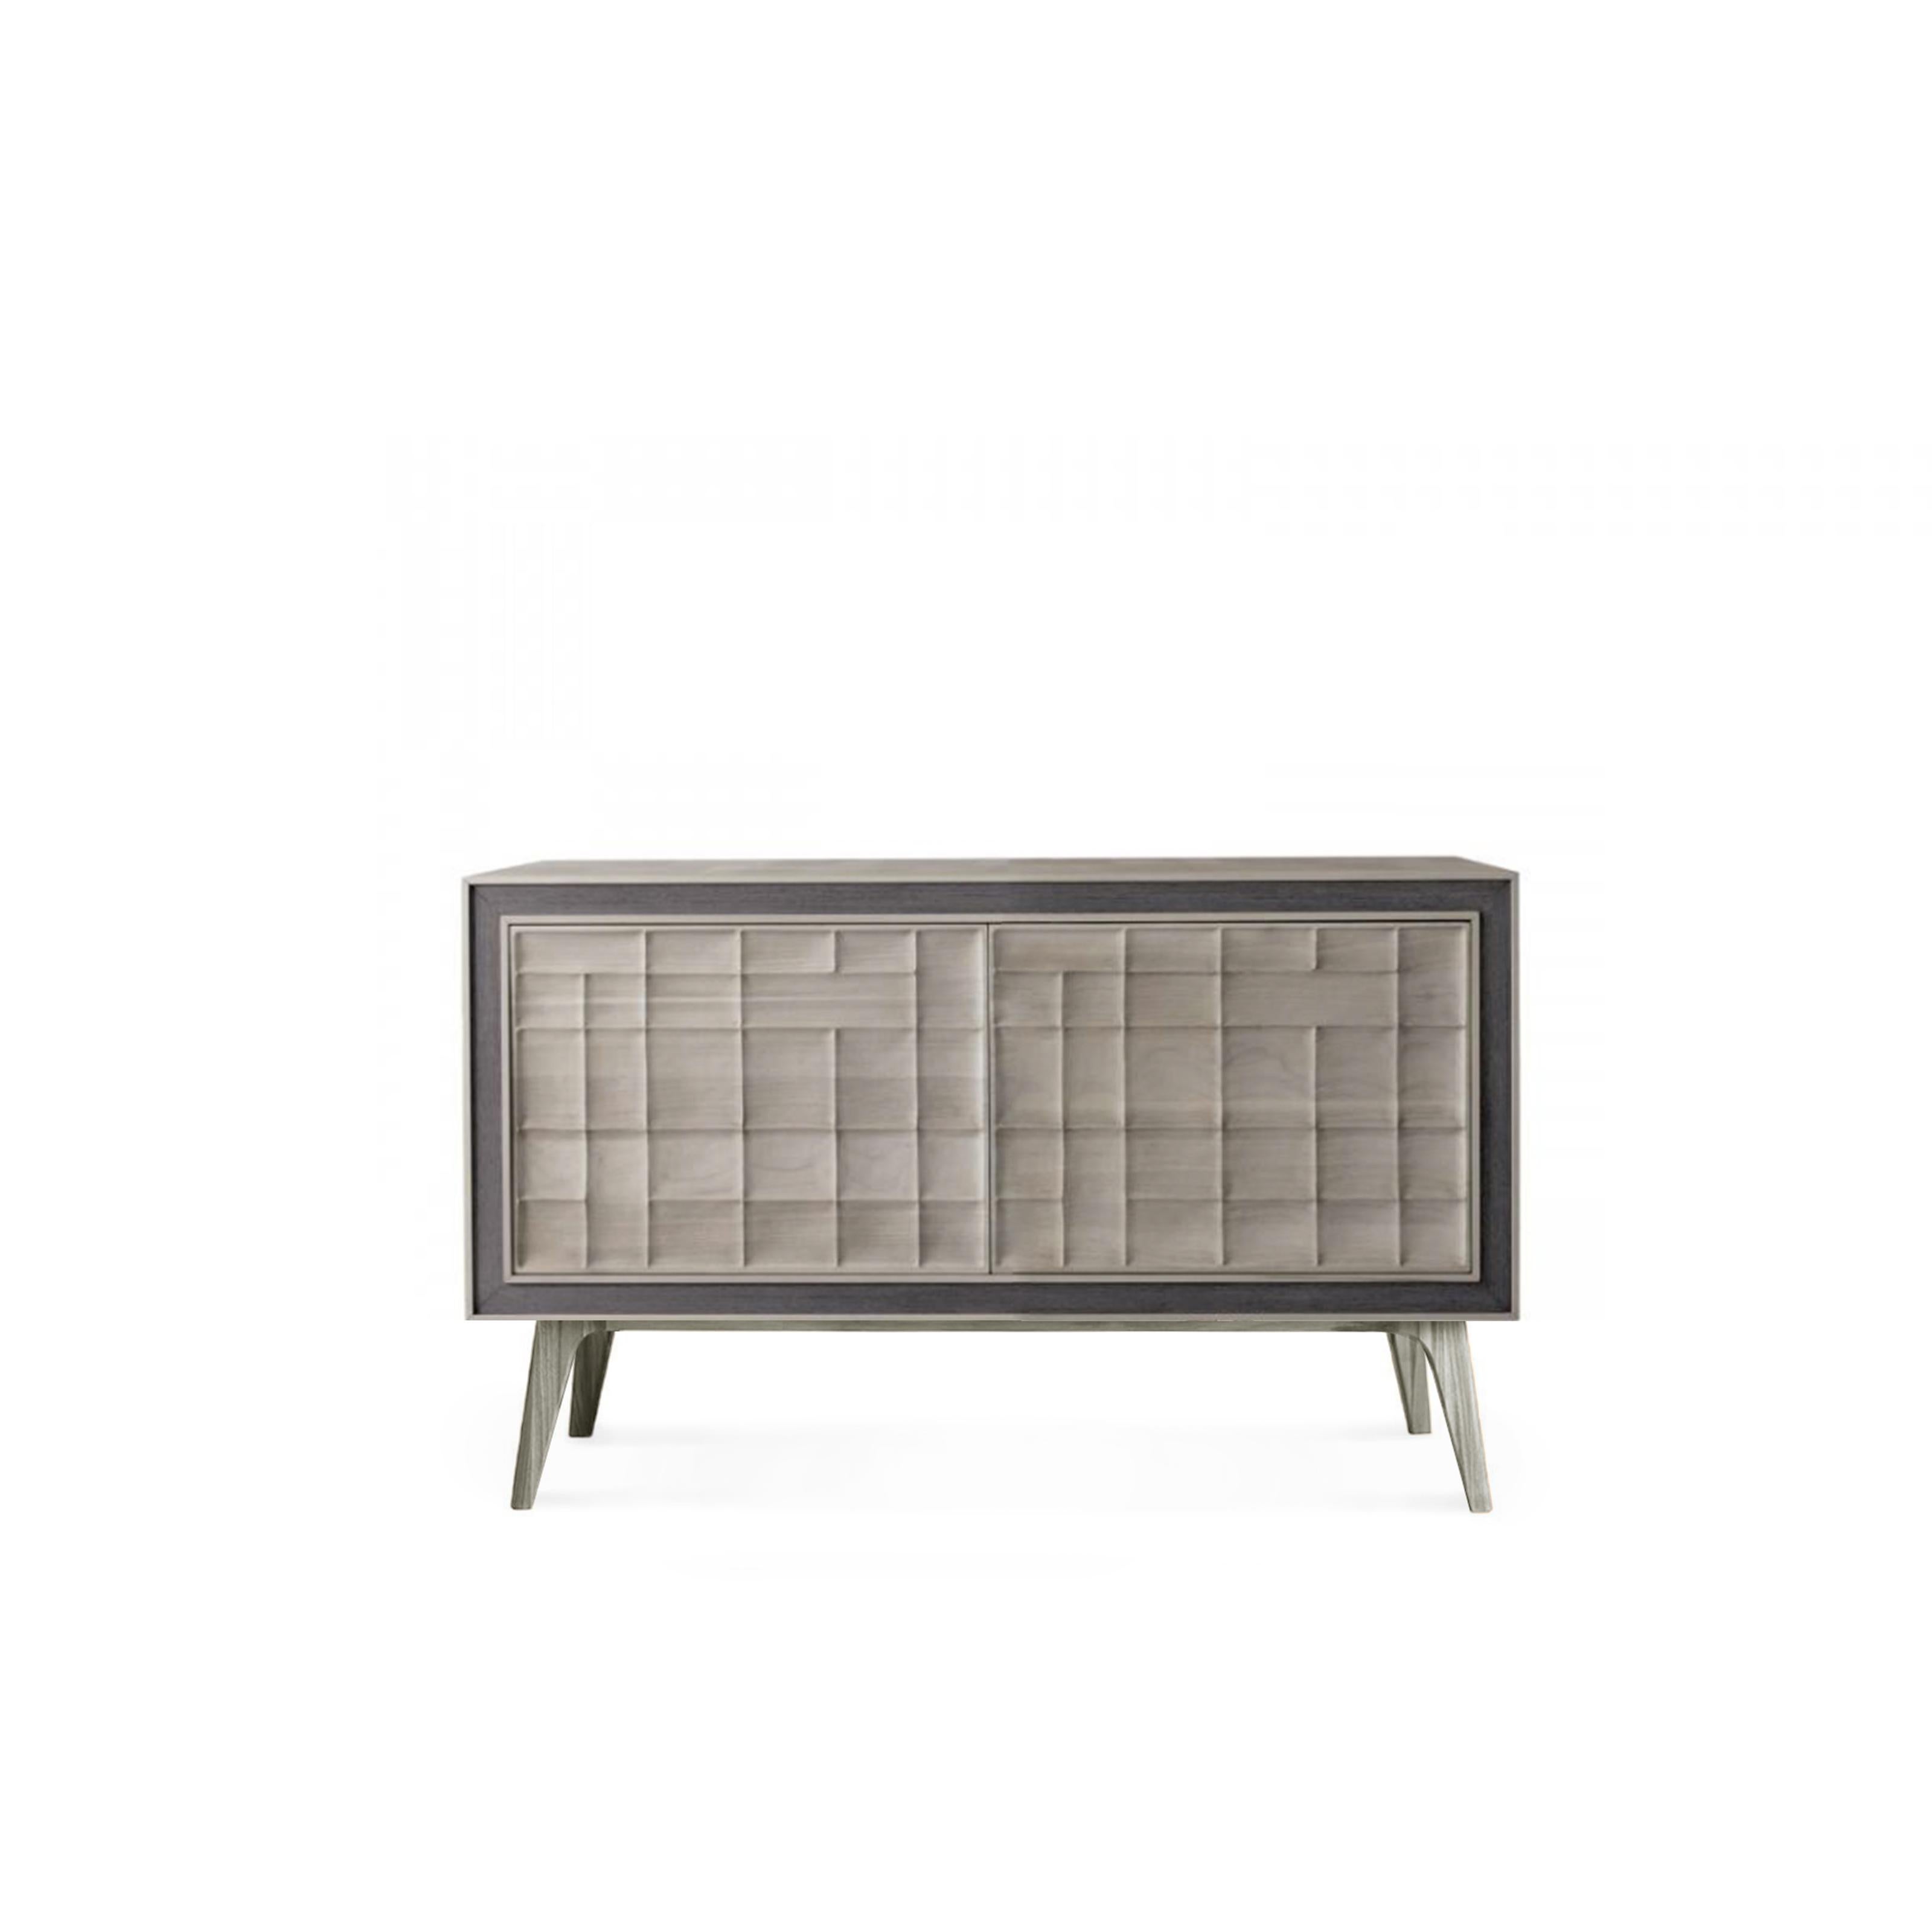 Modern Quadra Scacco Solid Wood Sideboard, Walnut in Natural Grey Finish, Contemporary For Sale